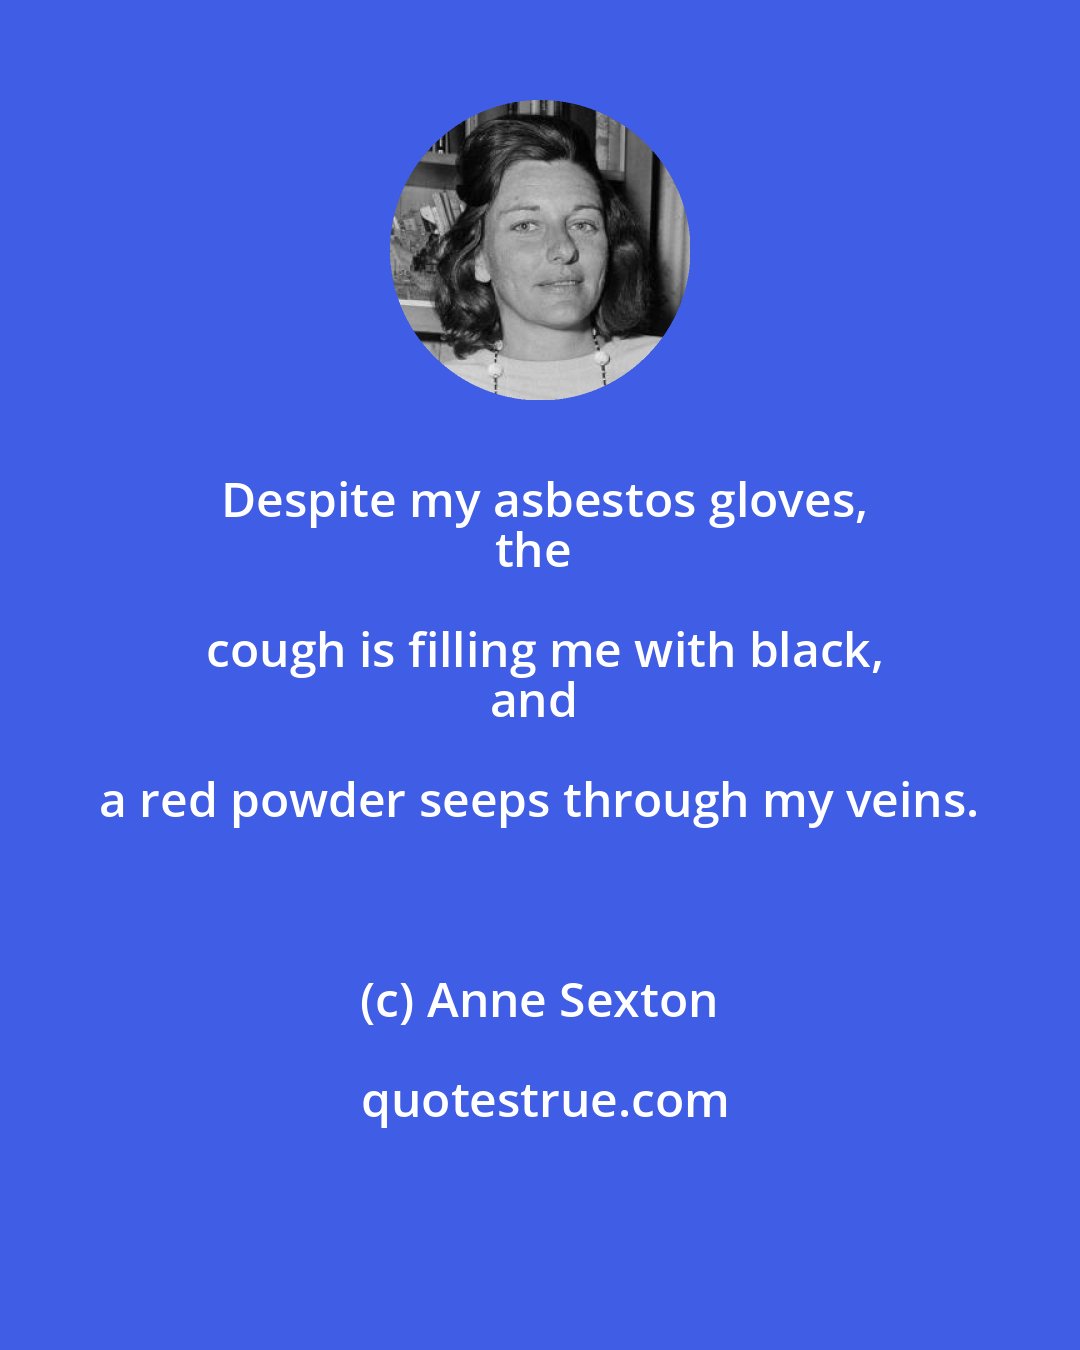 Anne Sexton: Despite my asbestos gloves,
the cough is filling me with black,
and a red powder seeps through my veins.